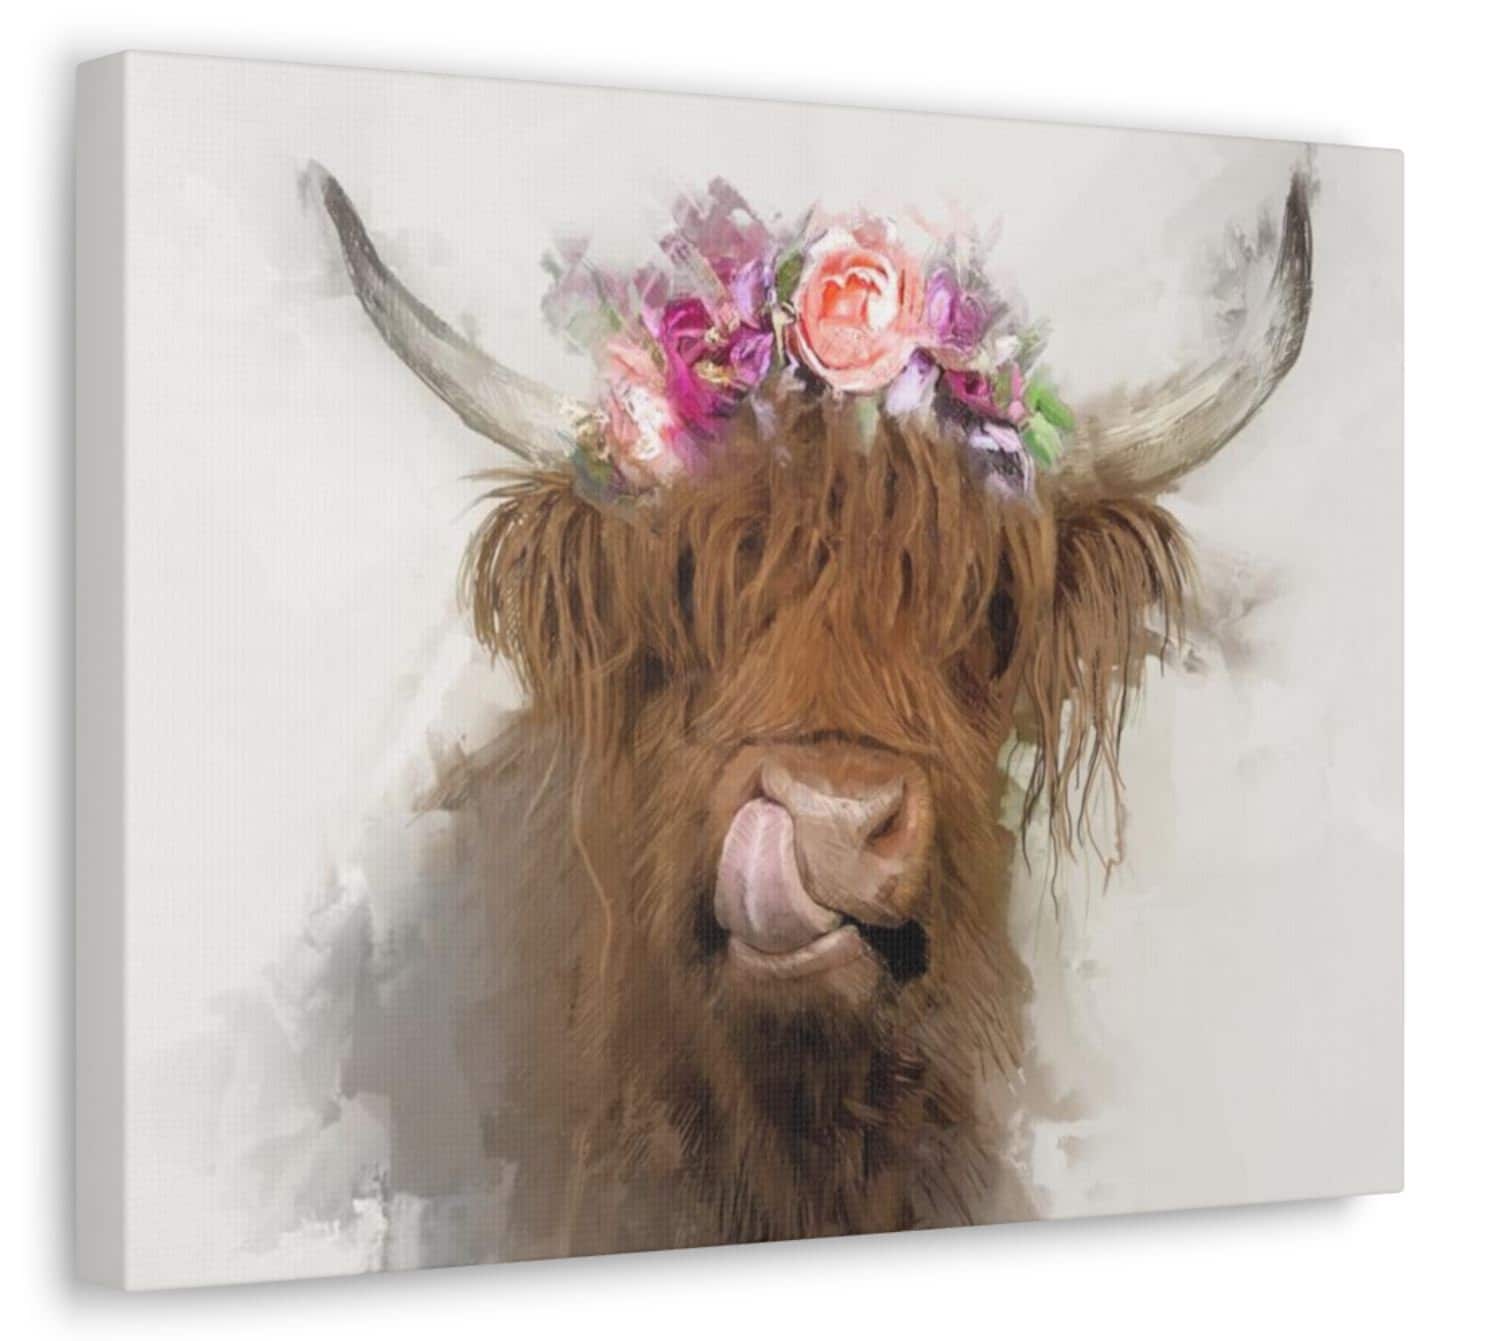 Highland Cow Flower Crown Canvas Artwork No.2, Beautiful Farm Art, Animal  Nature Gift, Wild Home Decor, Lovely Farming Countryside Wall Art 